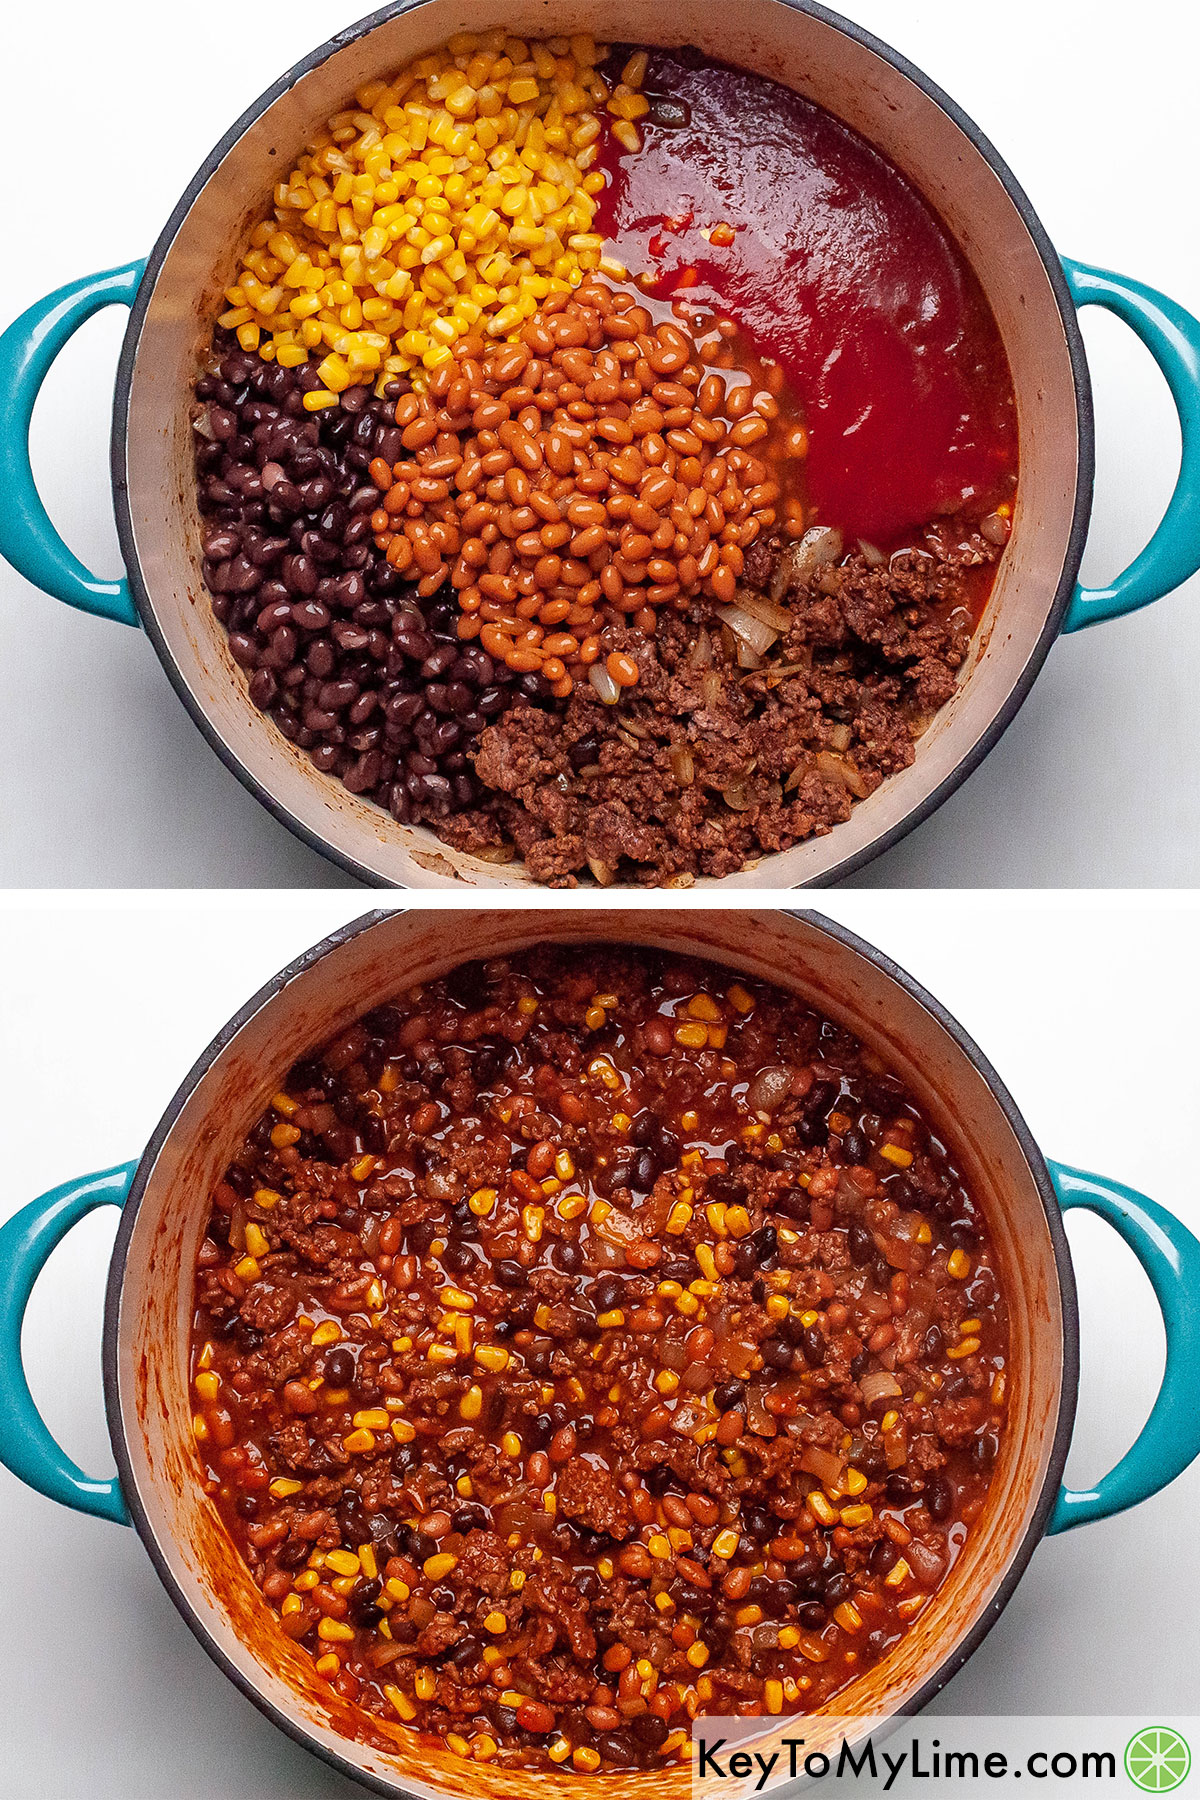 Mixing baked beans, black beans, tomato sauce, and corn into chili.